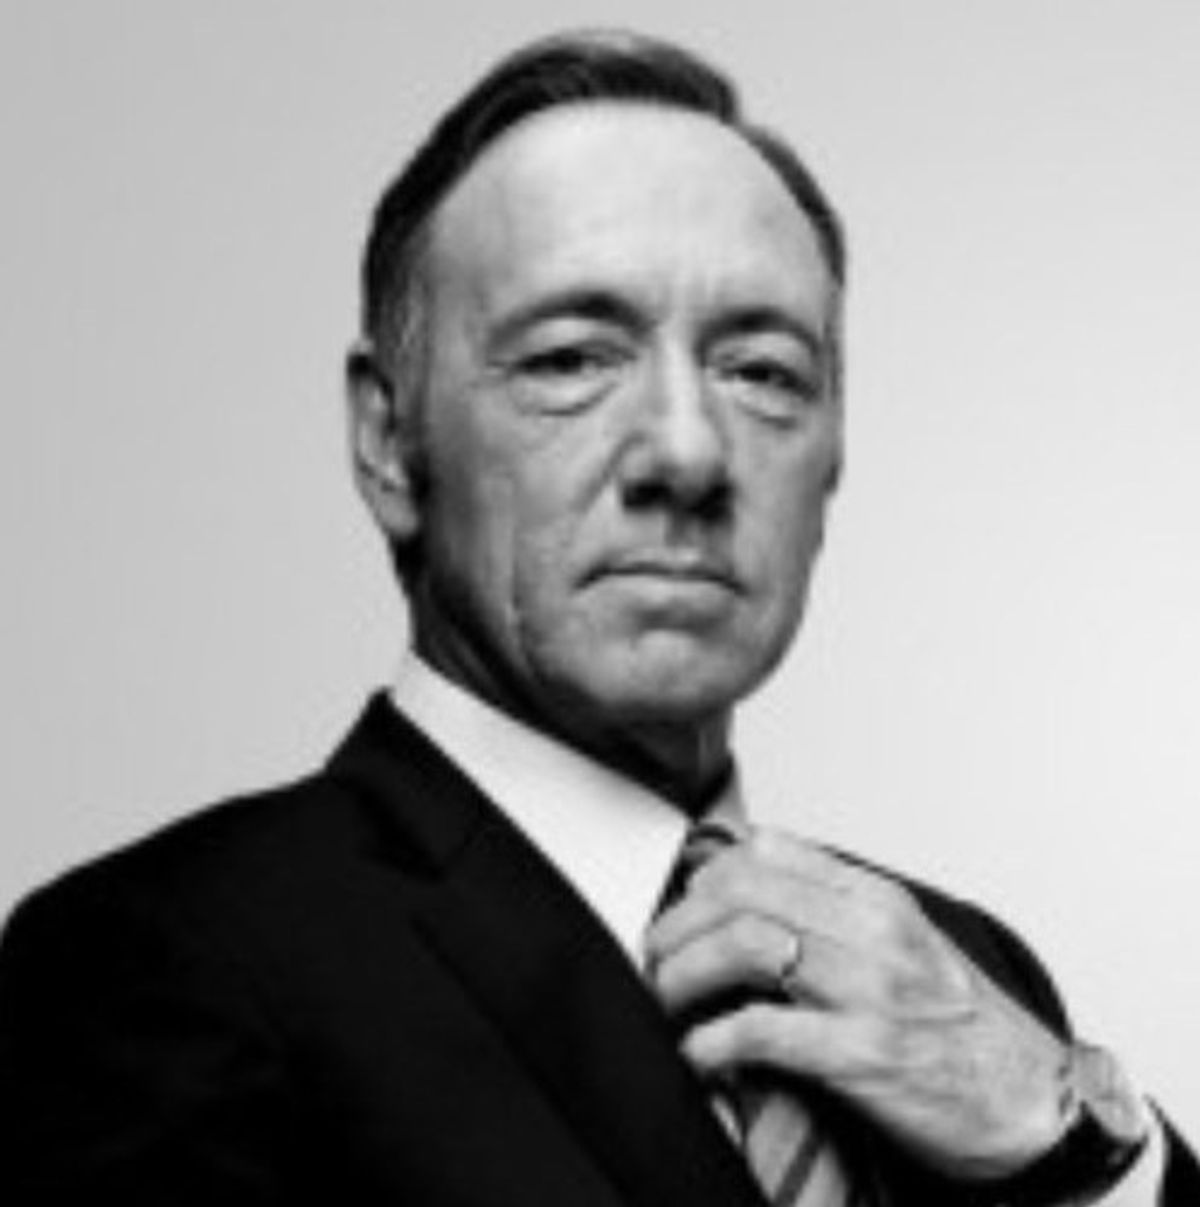 16 Frank Underwood Reactions To College Problems